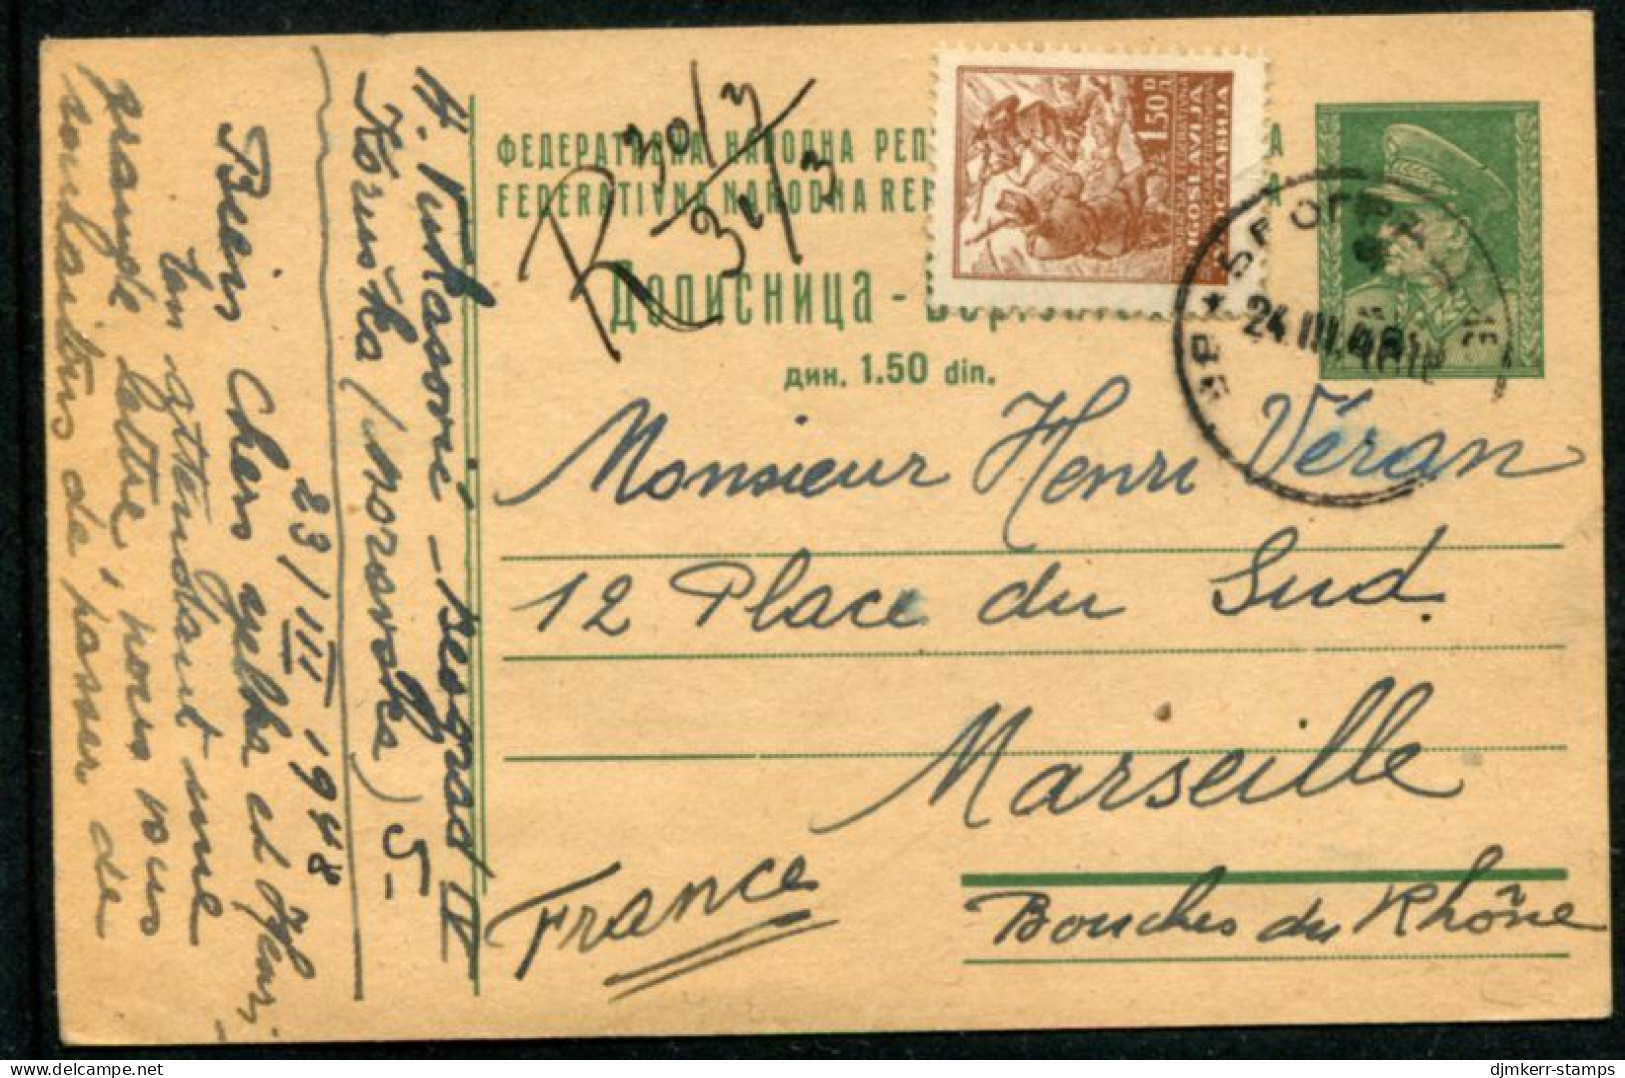 YUGOSLAVIA 1946 Tito 1.50 D.postal Stationery Card  With Text In Serbian/Croatian, Used To France.  Michel P107 - Ganzsachen